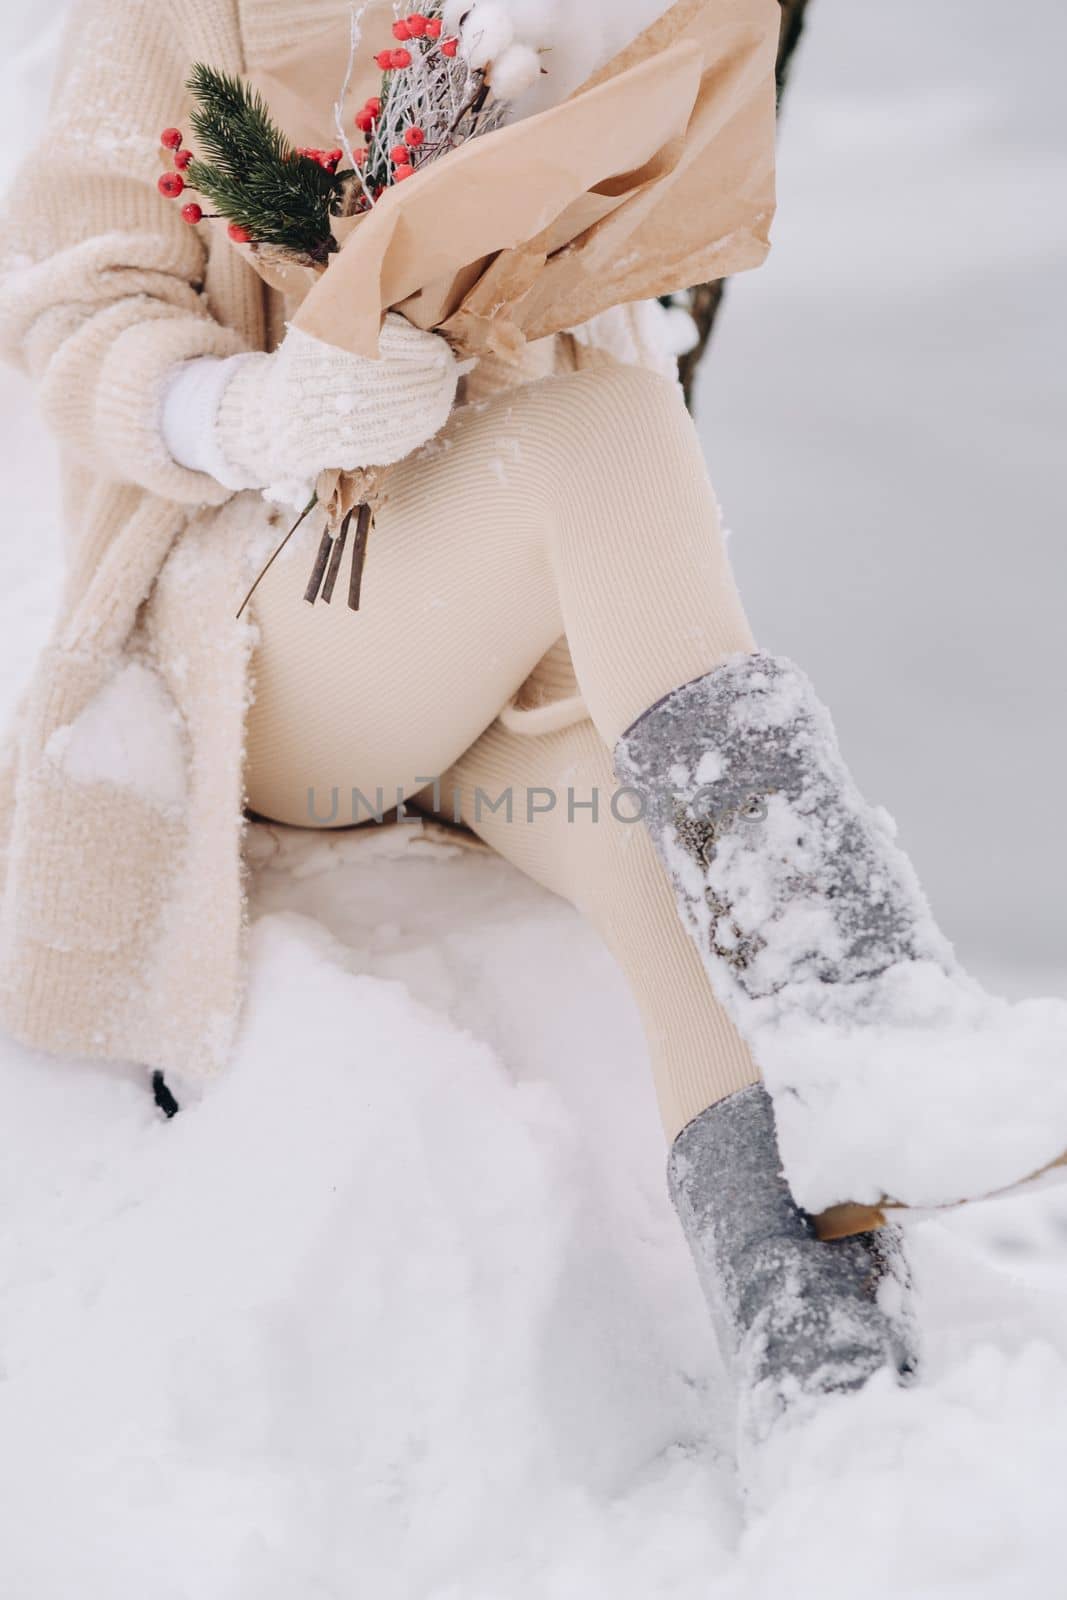 A close-up of the legs of a girl in felt boots with winter flowers sitting in nature in the snowy season. Winter weather.